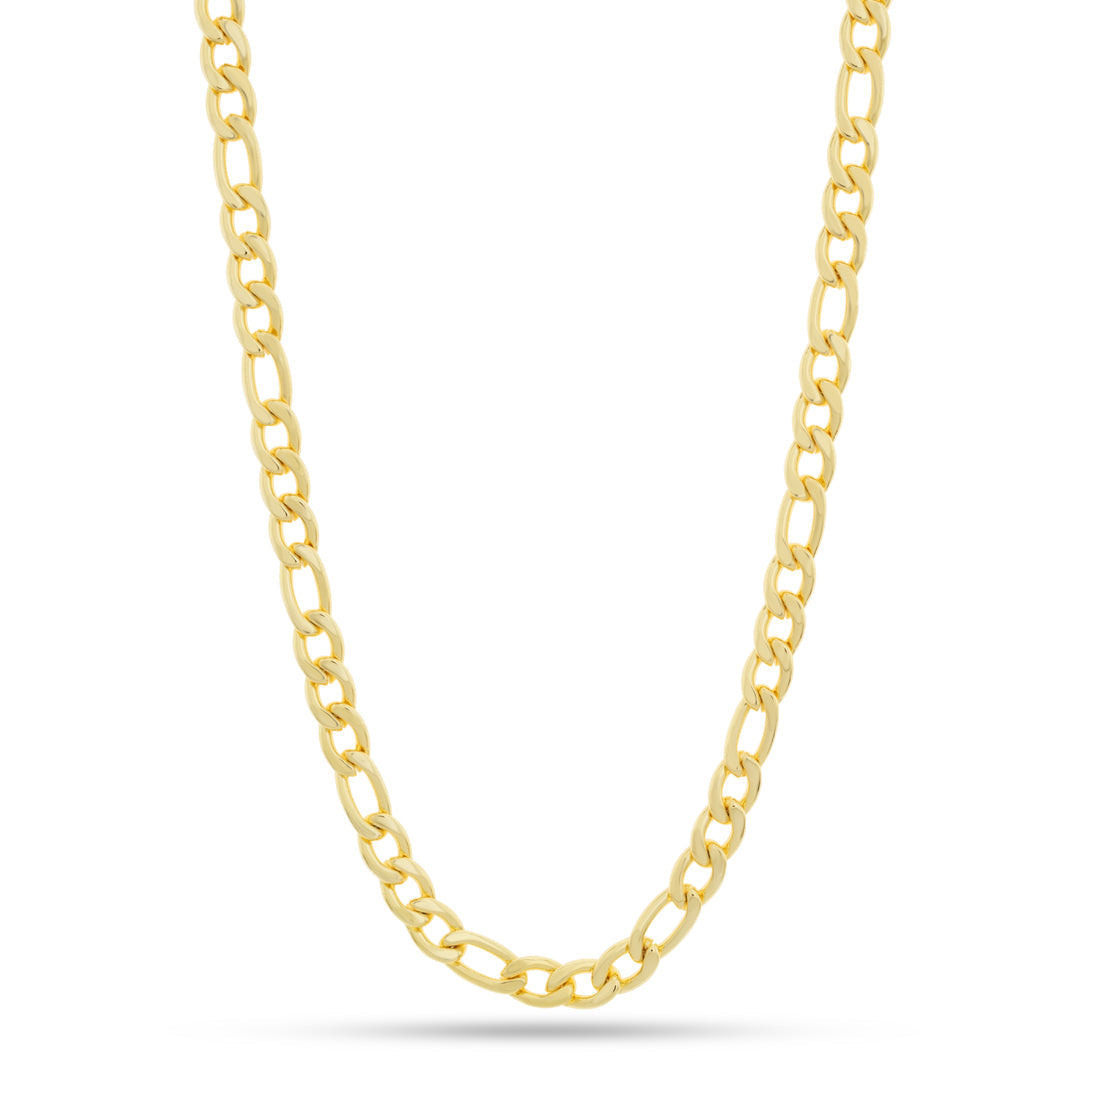 Gold Plated / 14K Gold / 24" 10mm Italian Figaro Chain